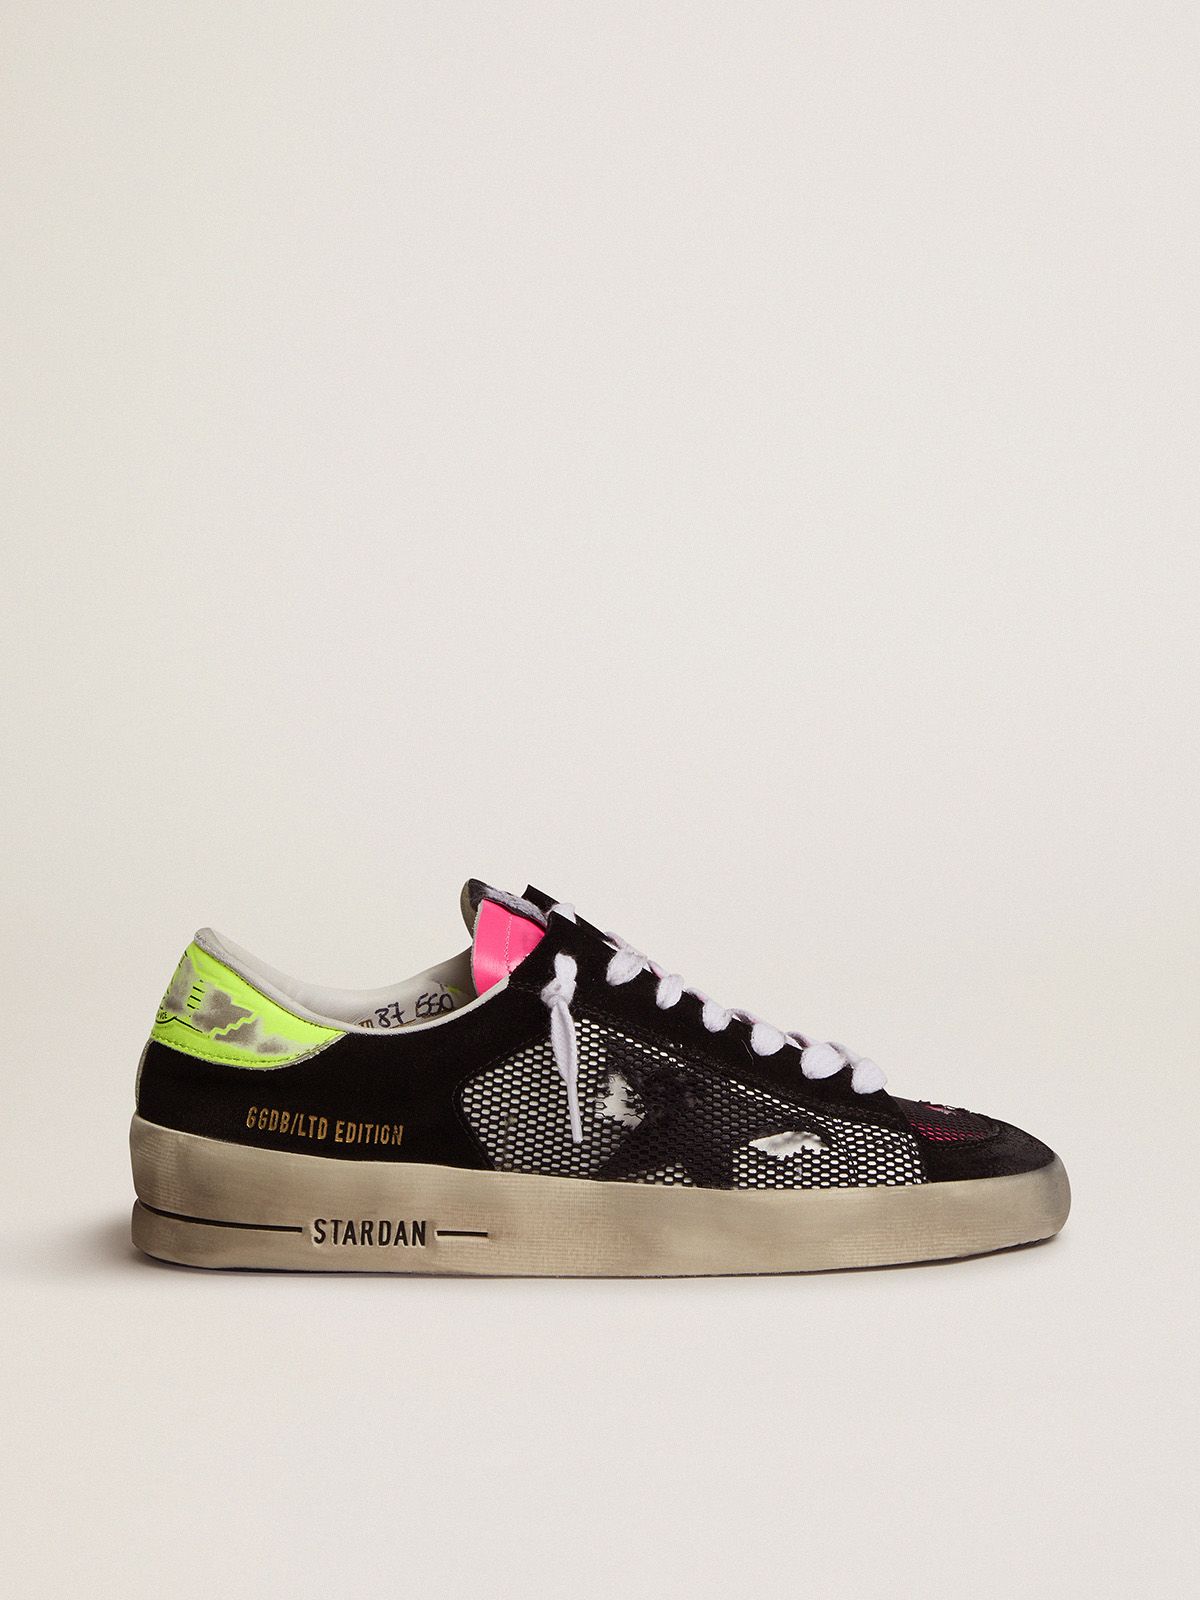 golden goose fuchsia and Women’s sneakers Edition Stardan in yellow Limited